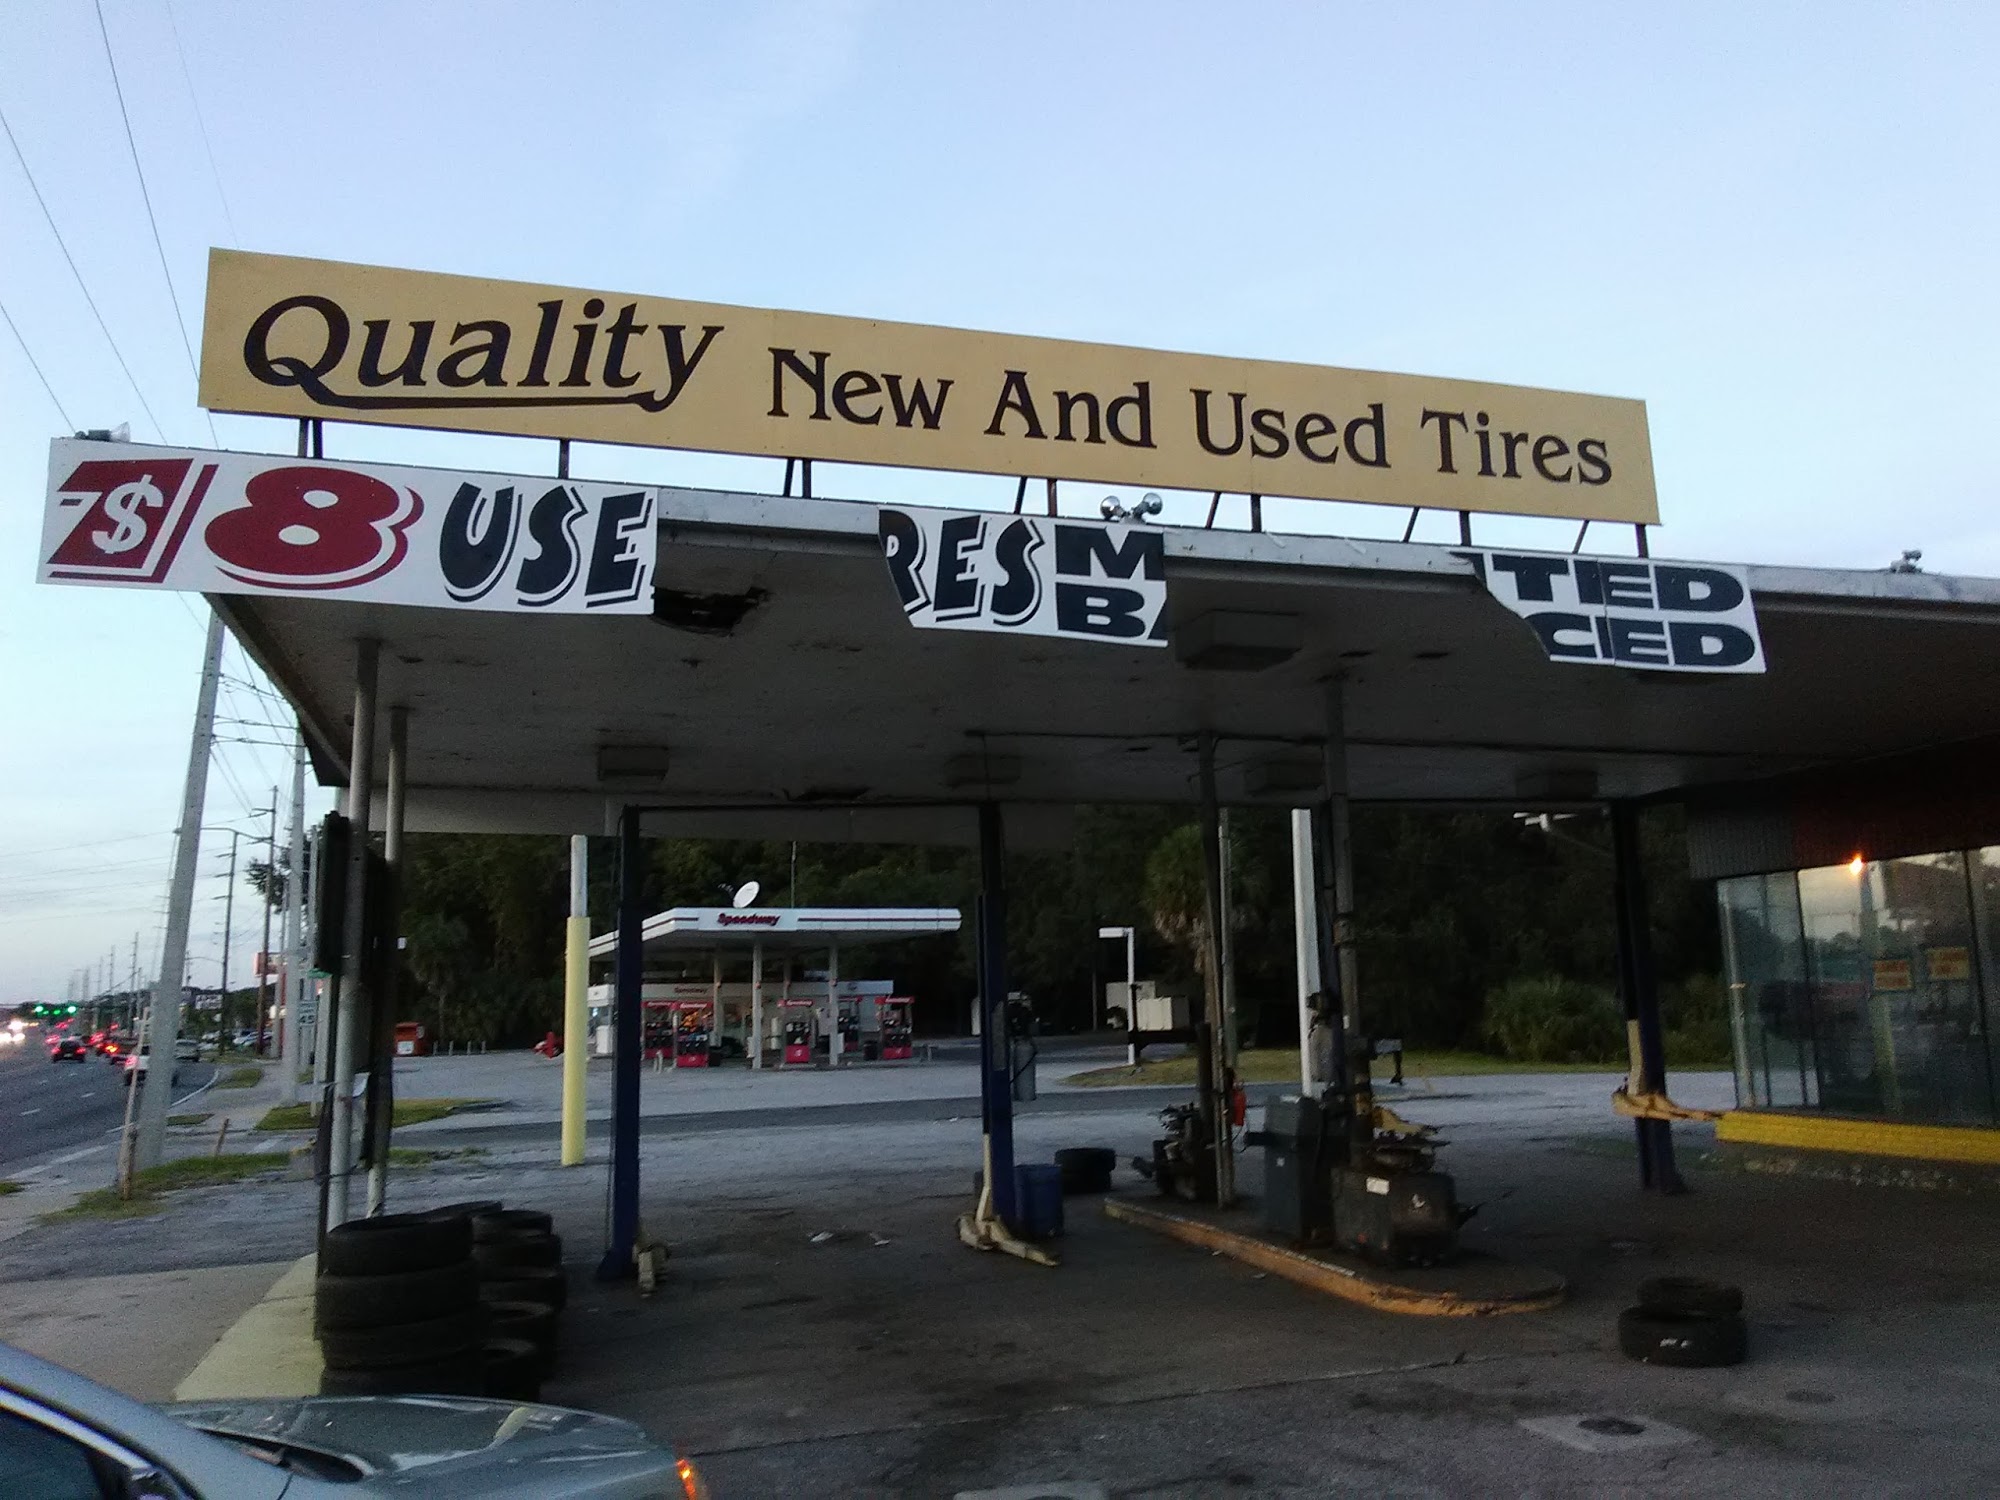 Quality New & Used Tires